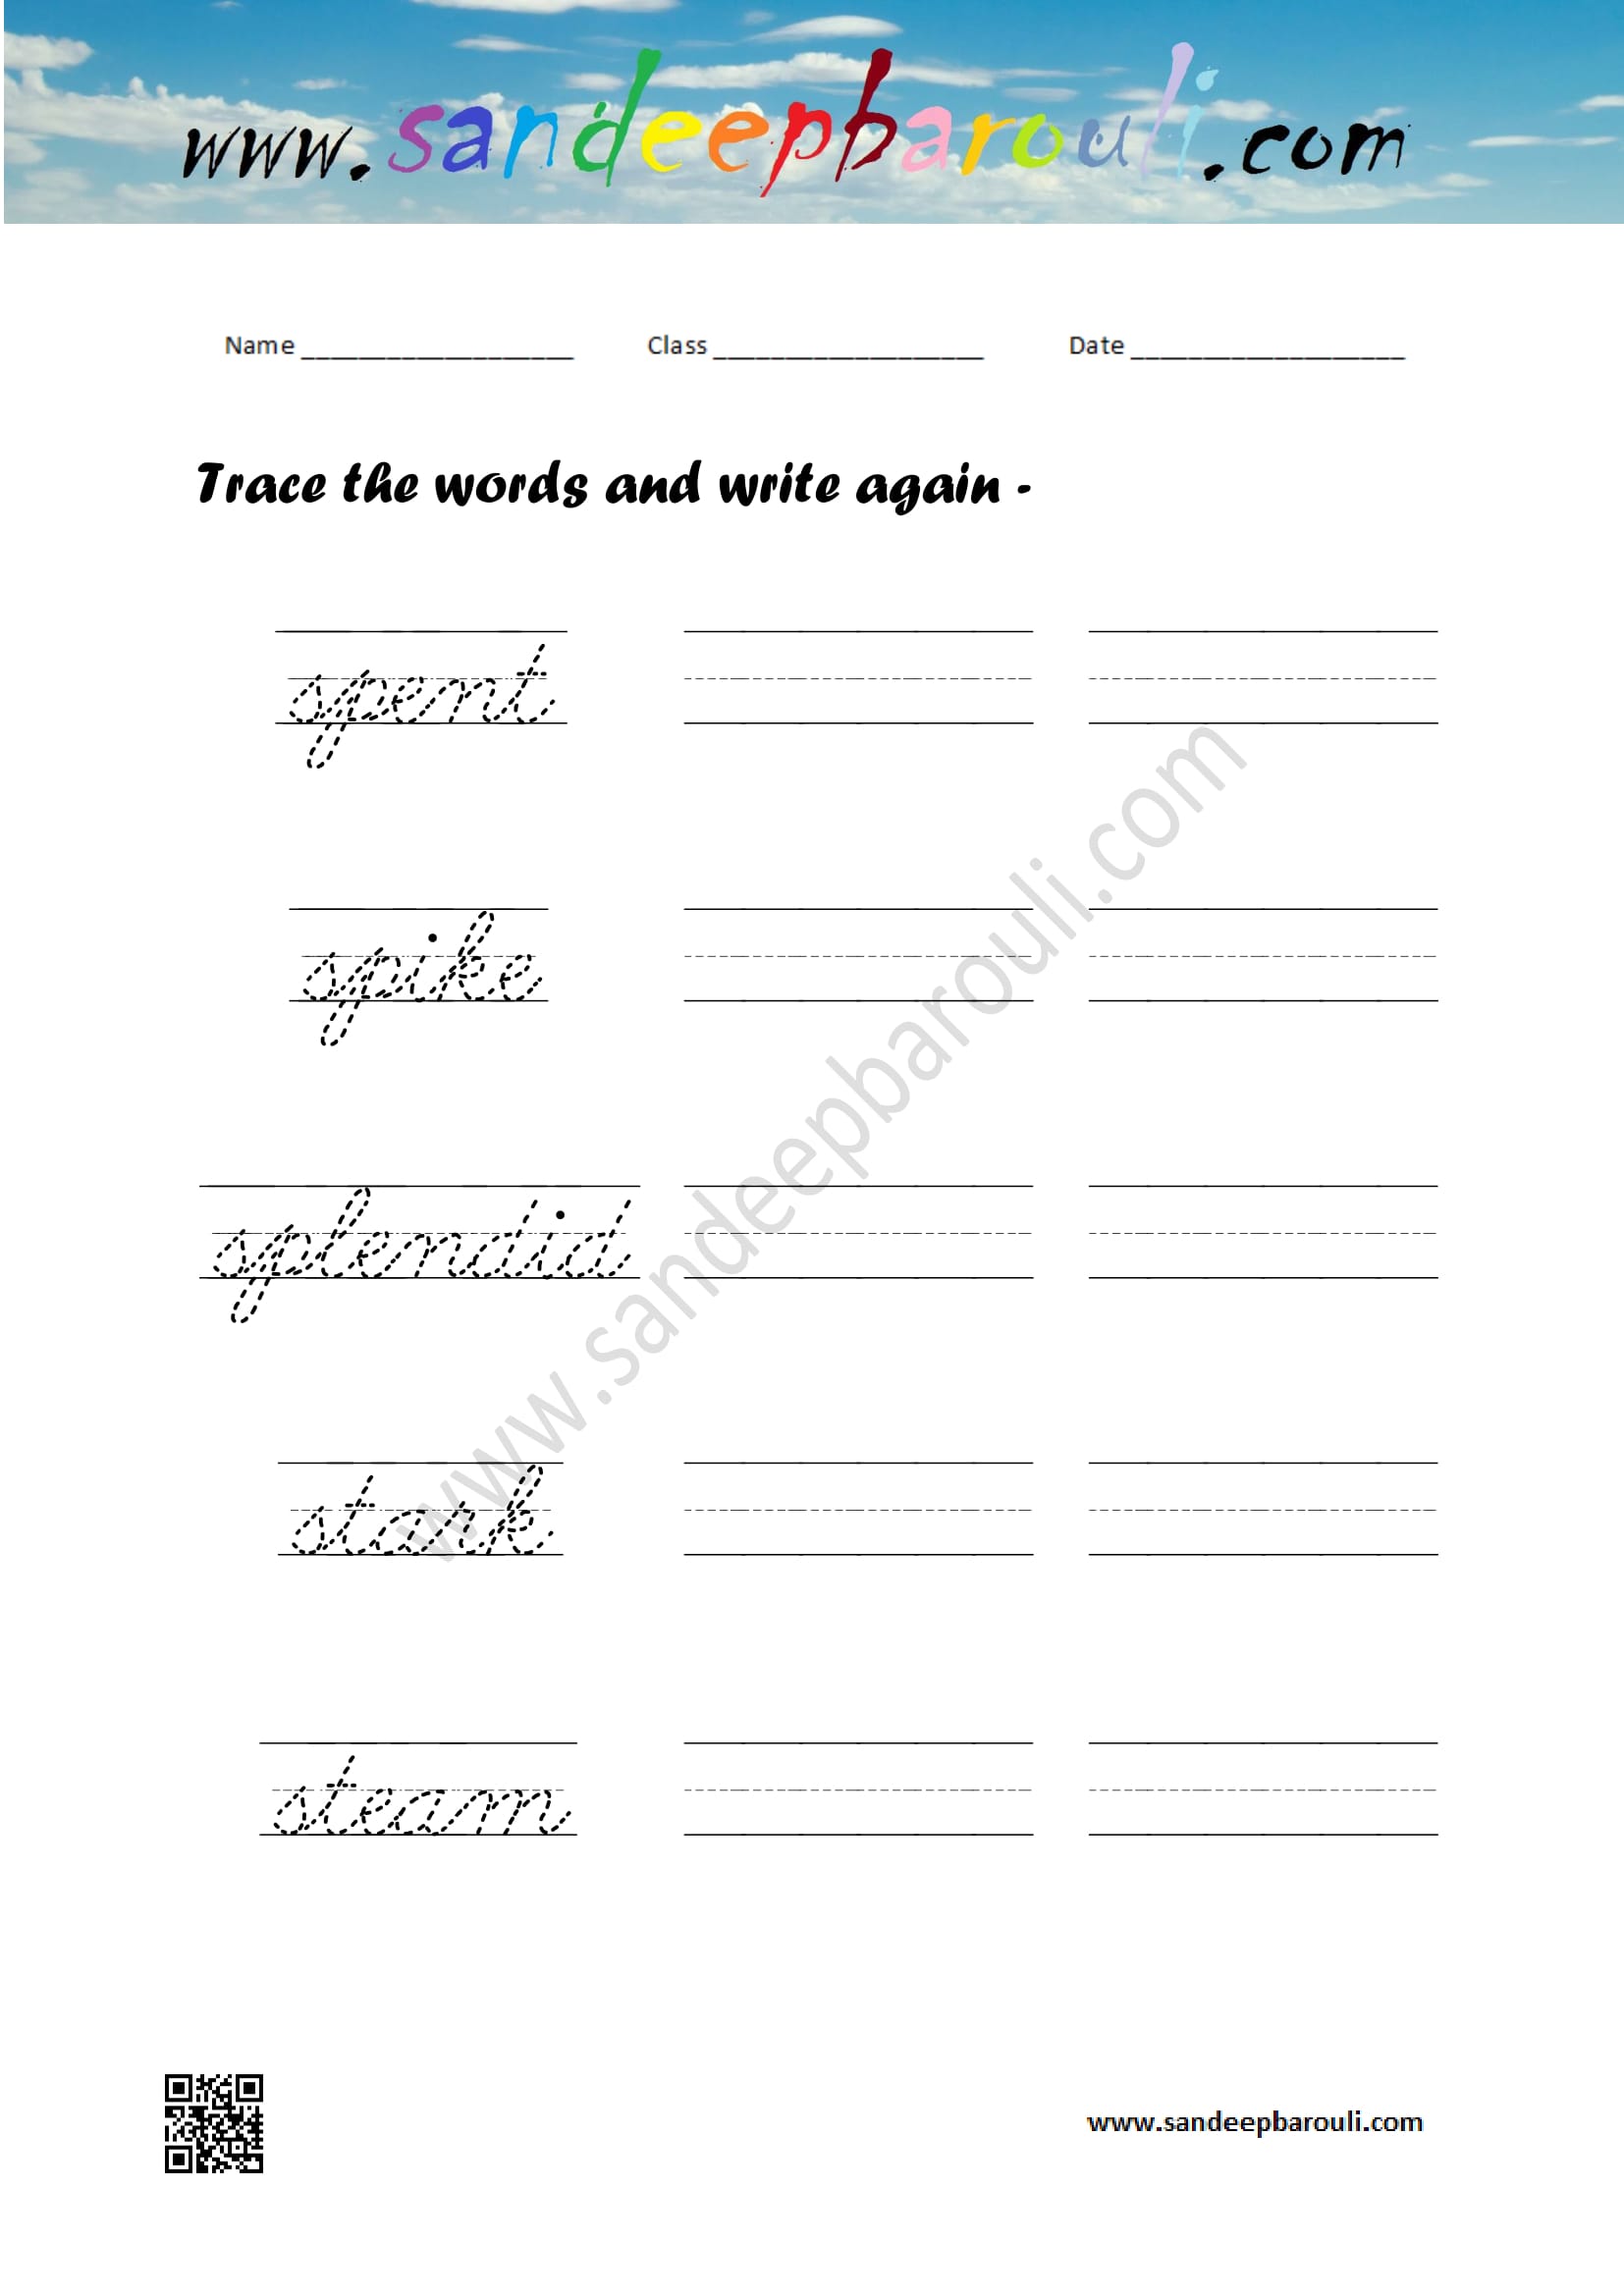 Cursive writing worksheet – trace the words and write again (109)